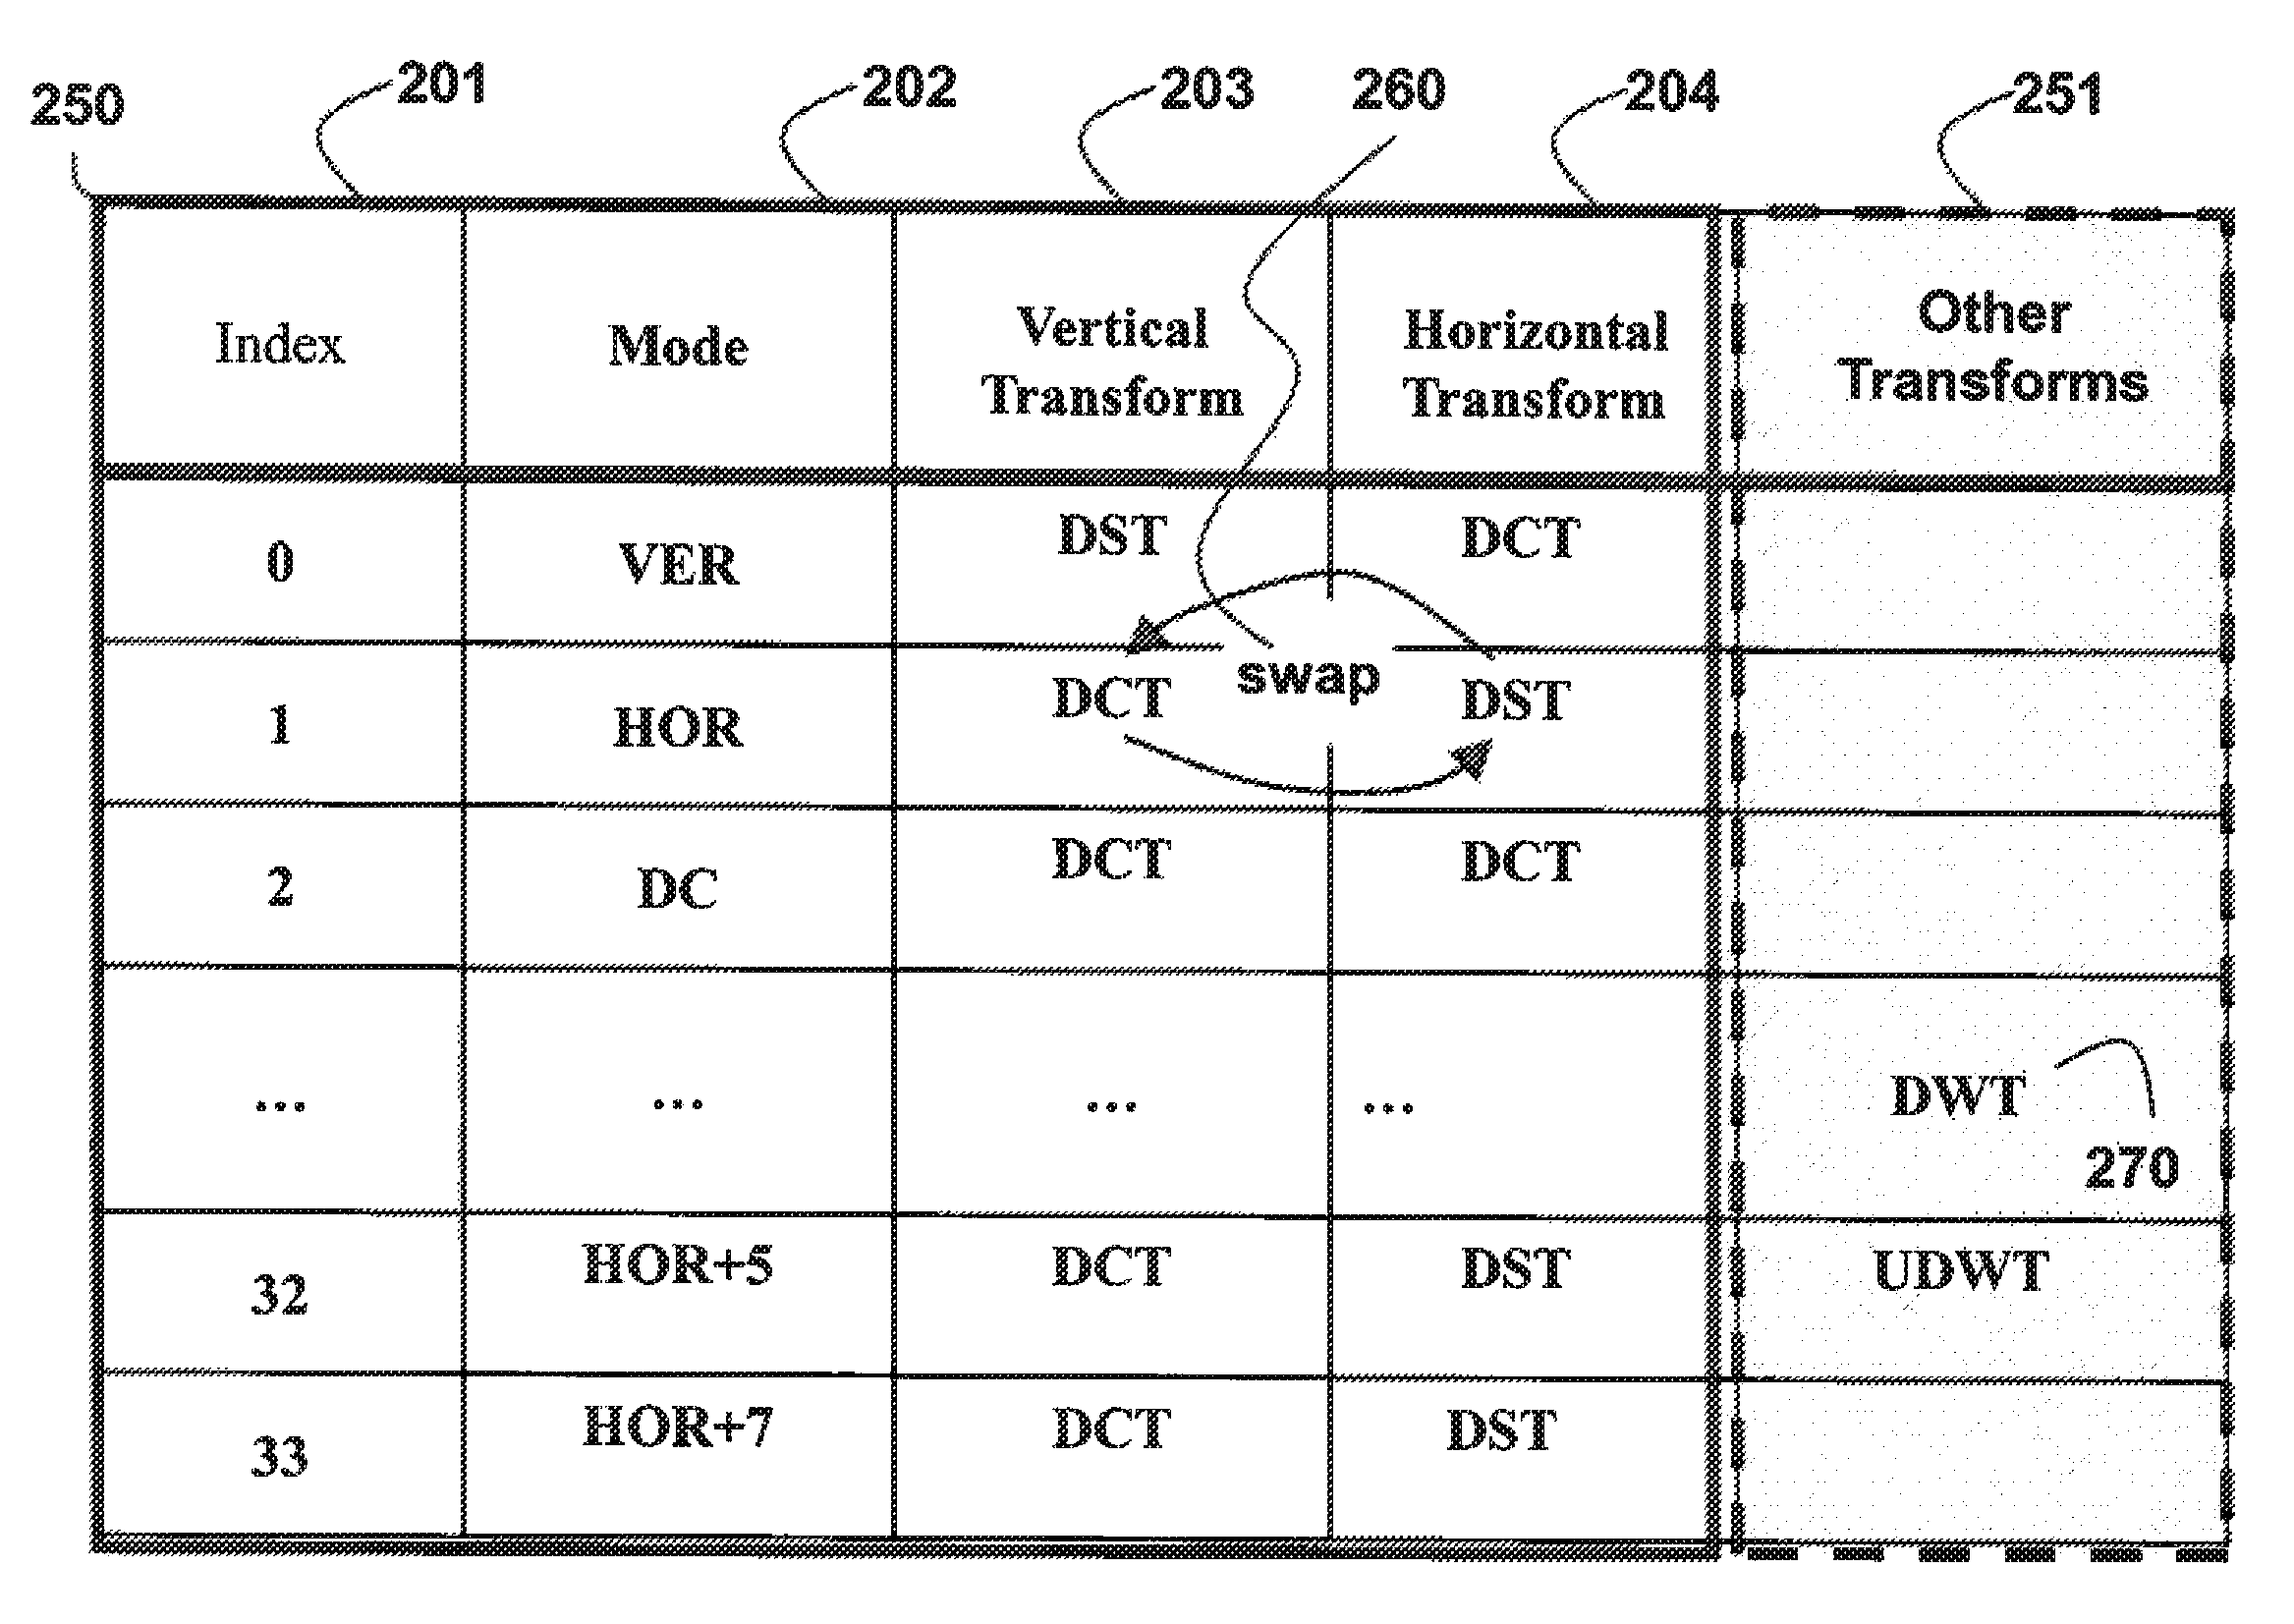 Method for selecting transform types from mapping table for prediction modes